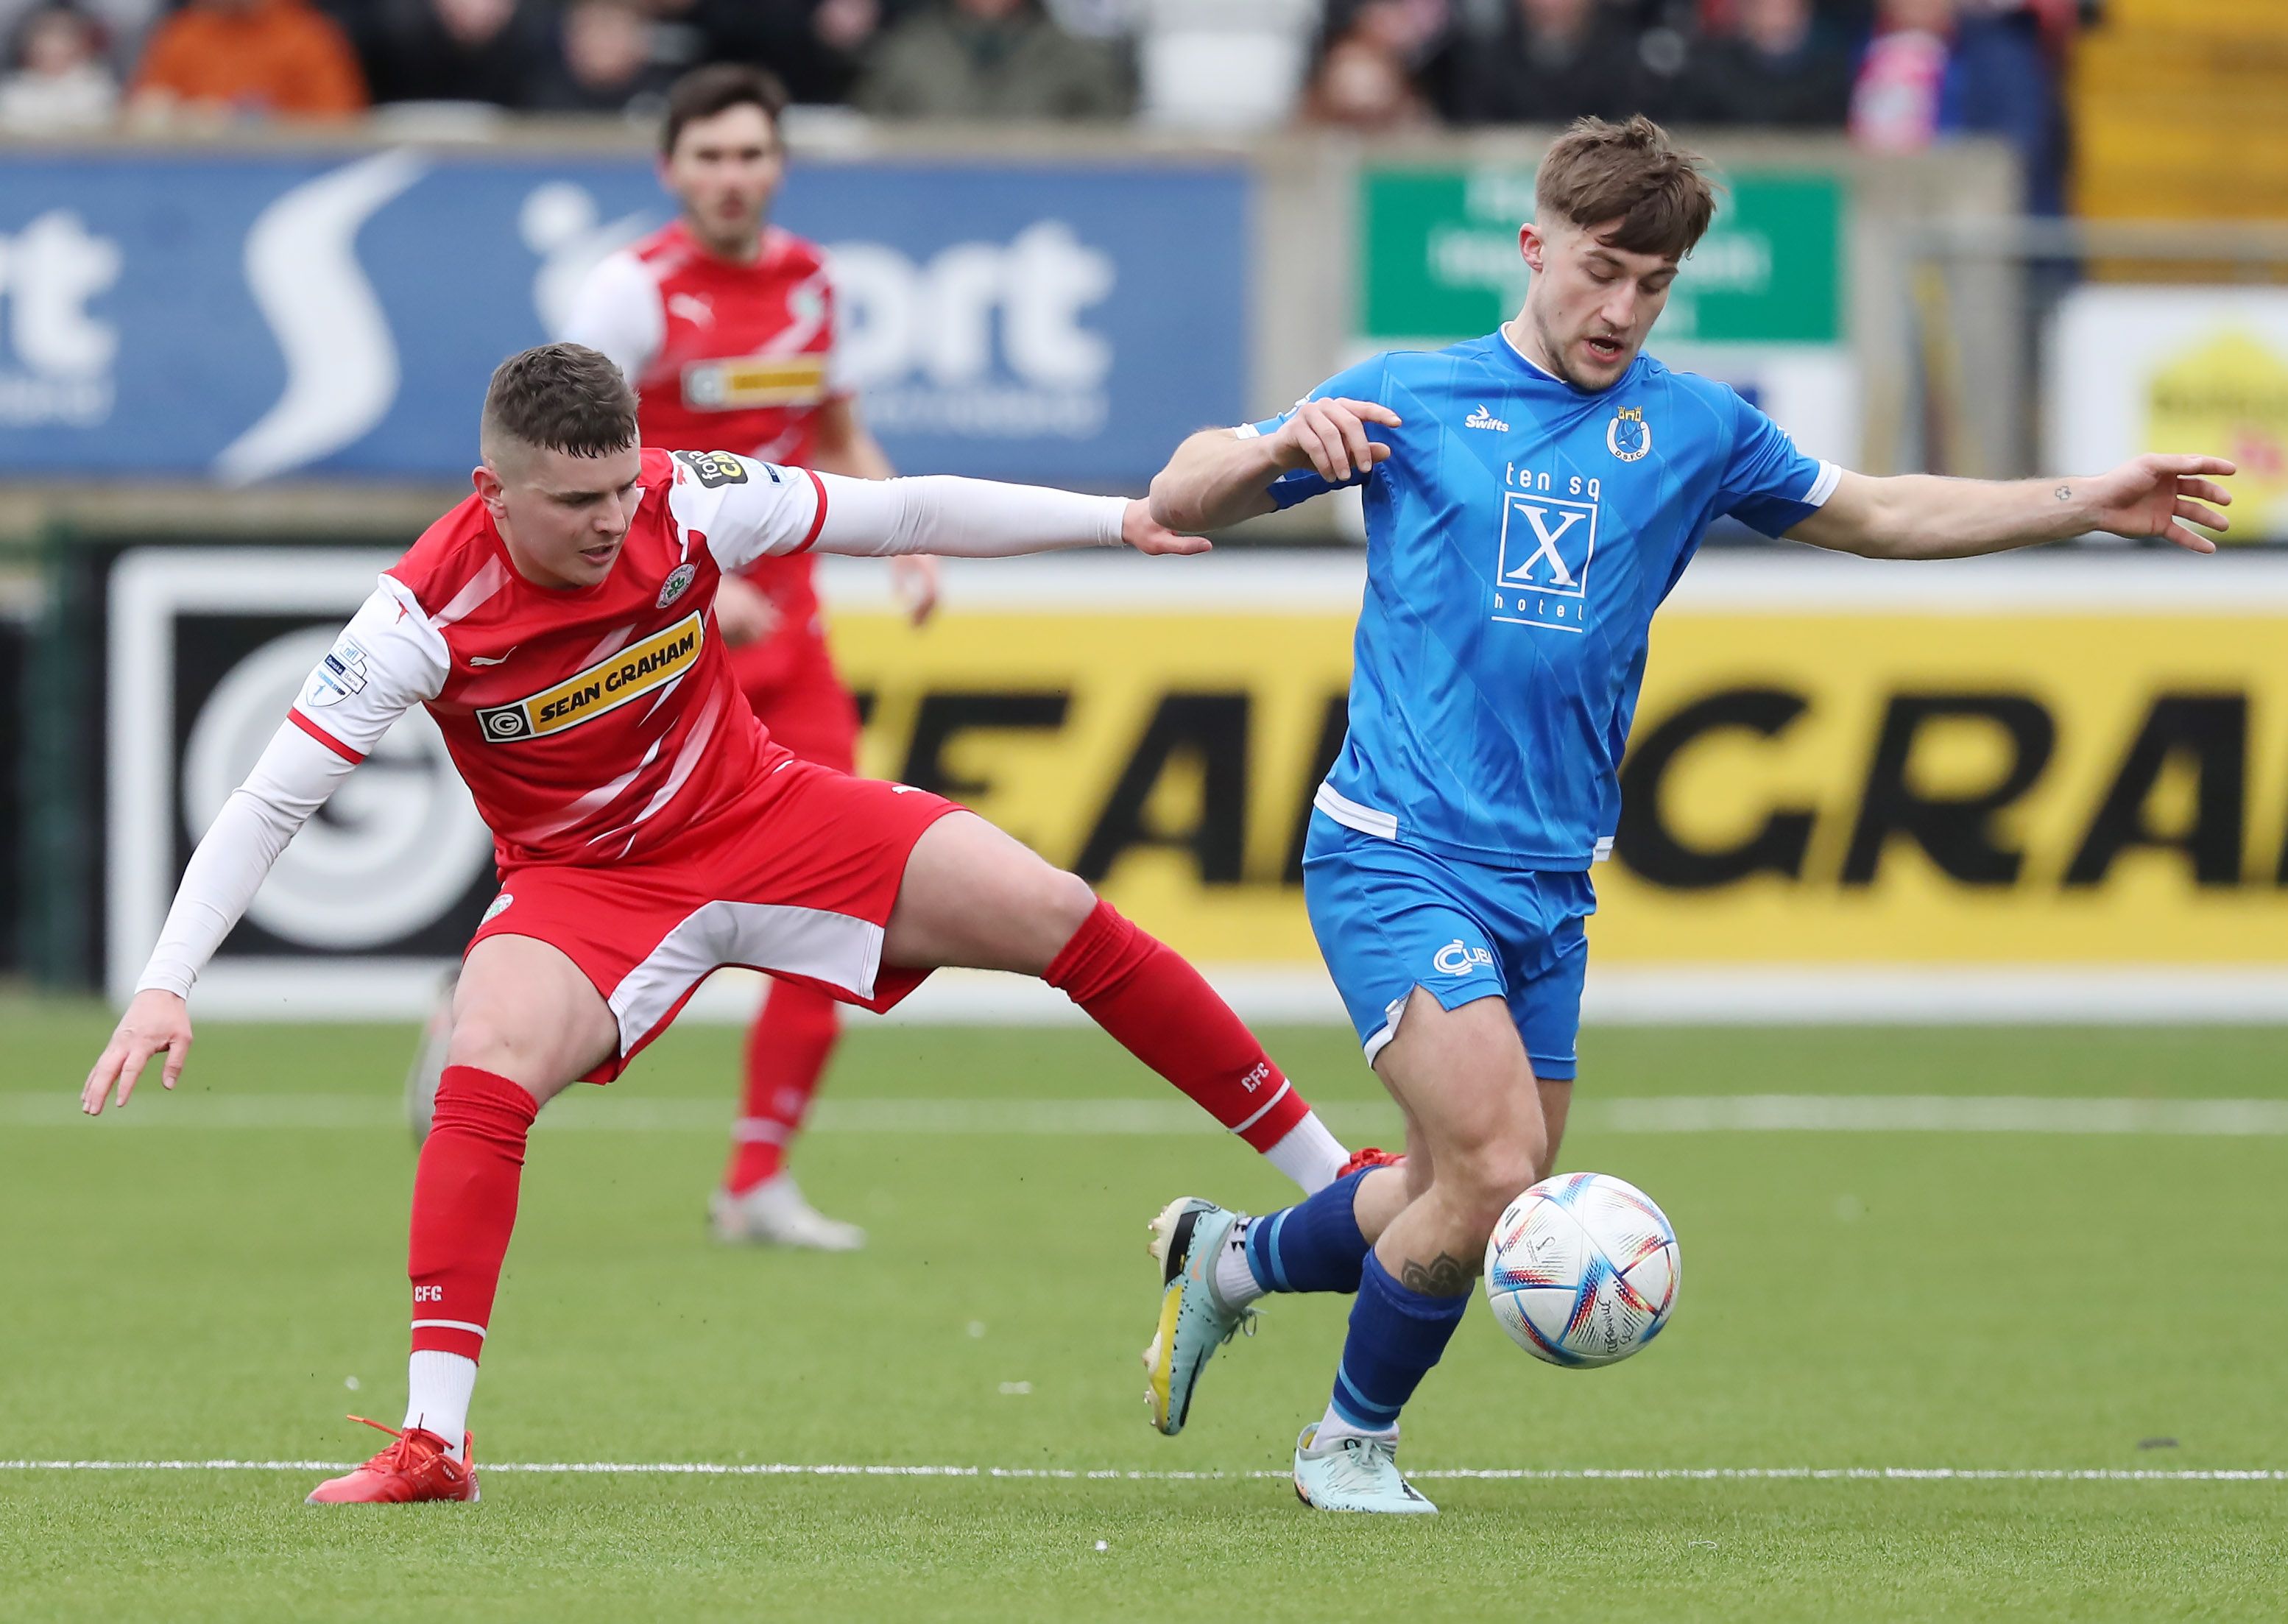 Dungannon Swifts left Cliftonville trailing in the recent Irish Cup tie